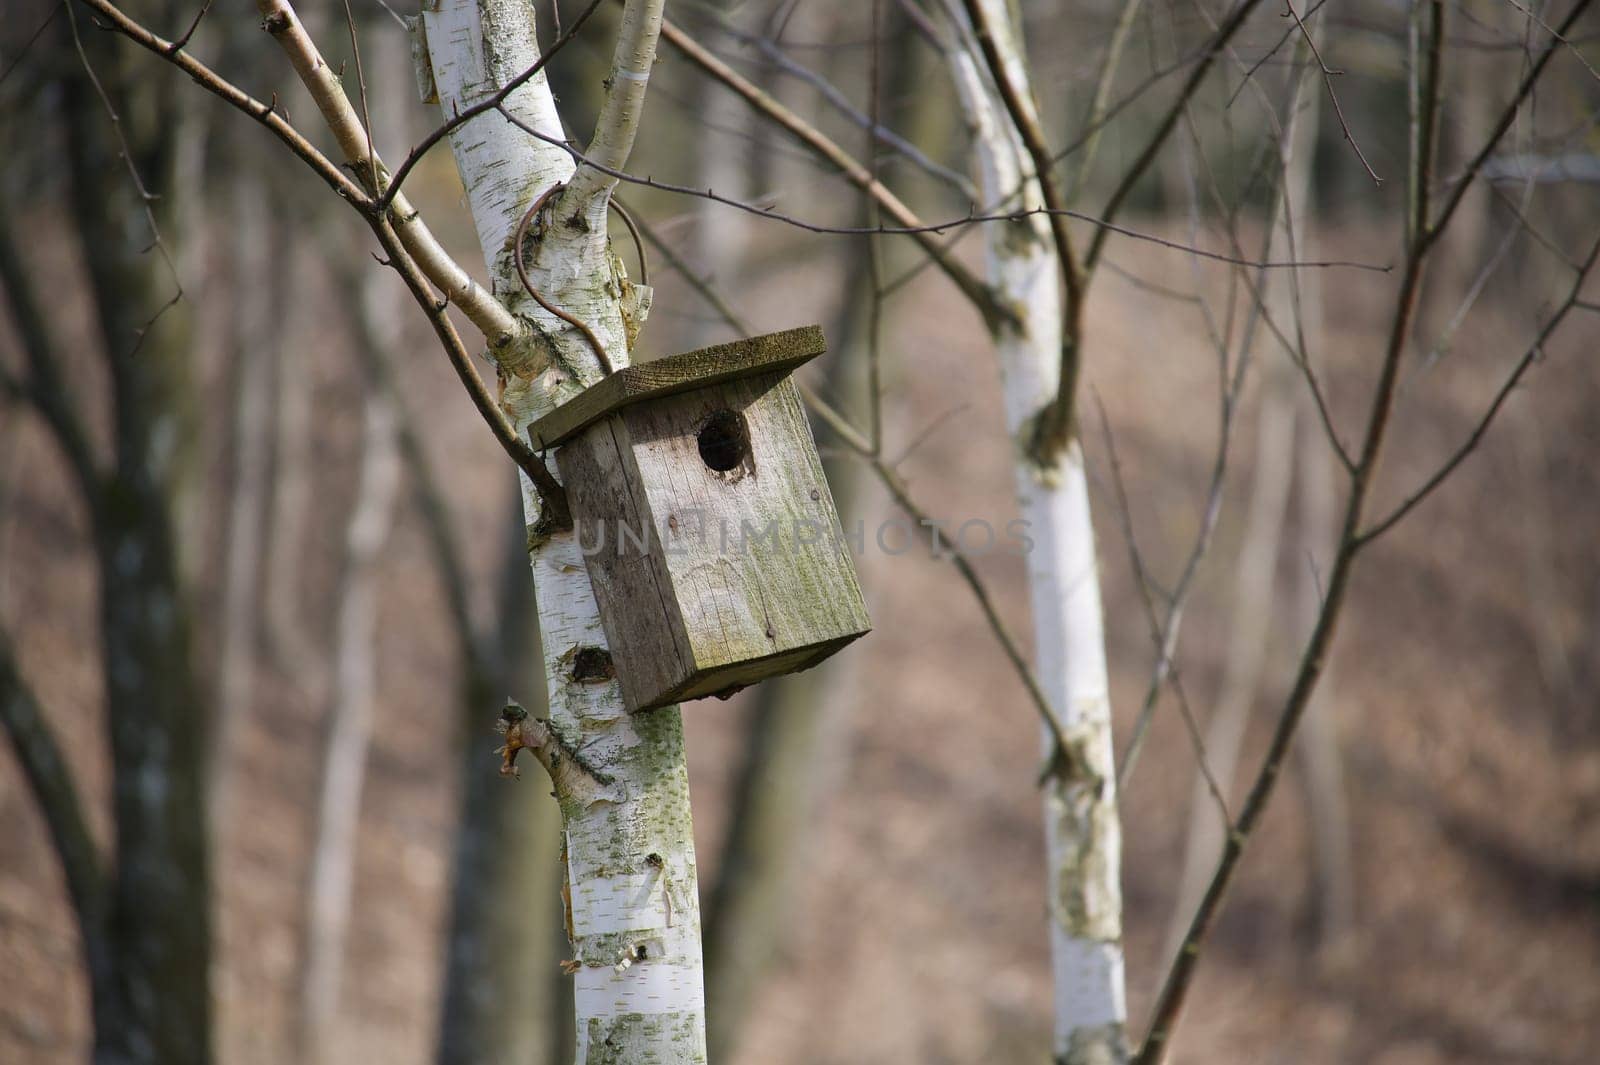 Wooden birdhouse mounted on the trunk of a birch tree within a forested area